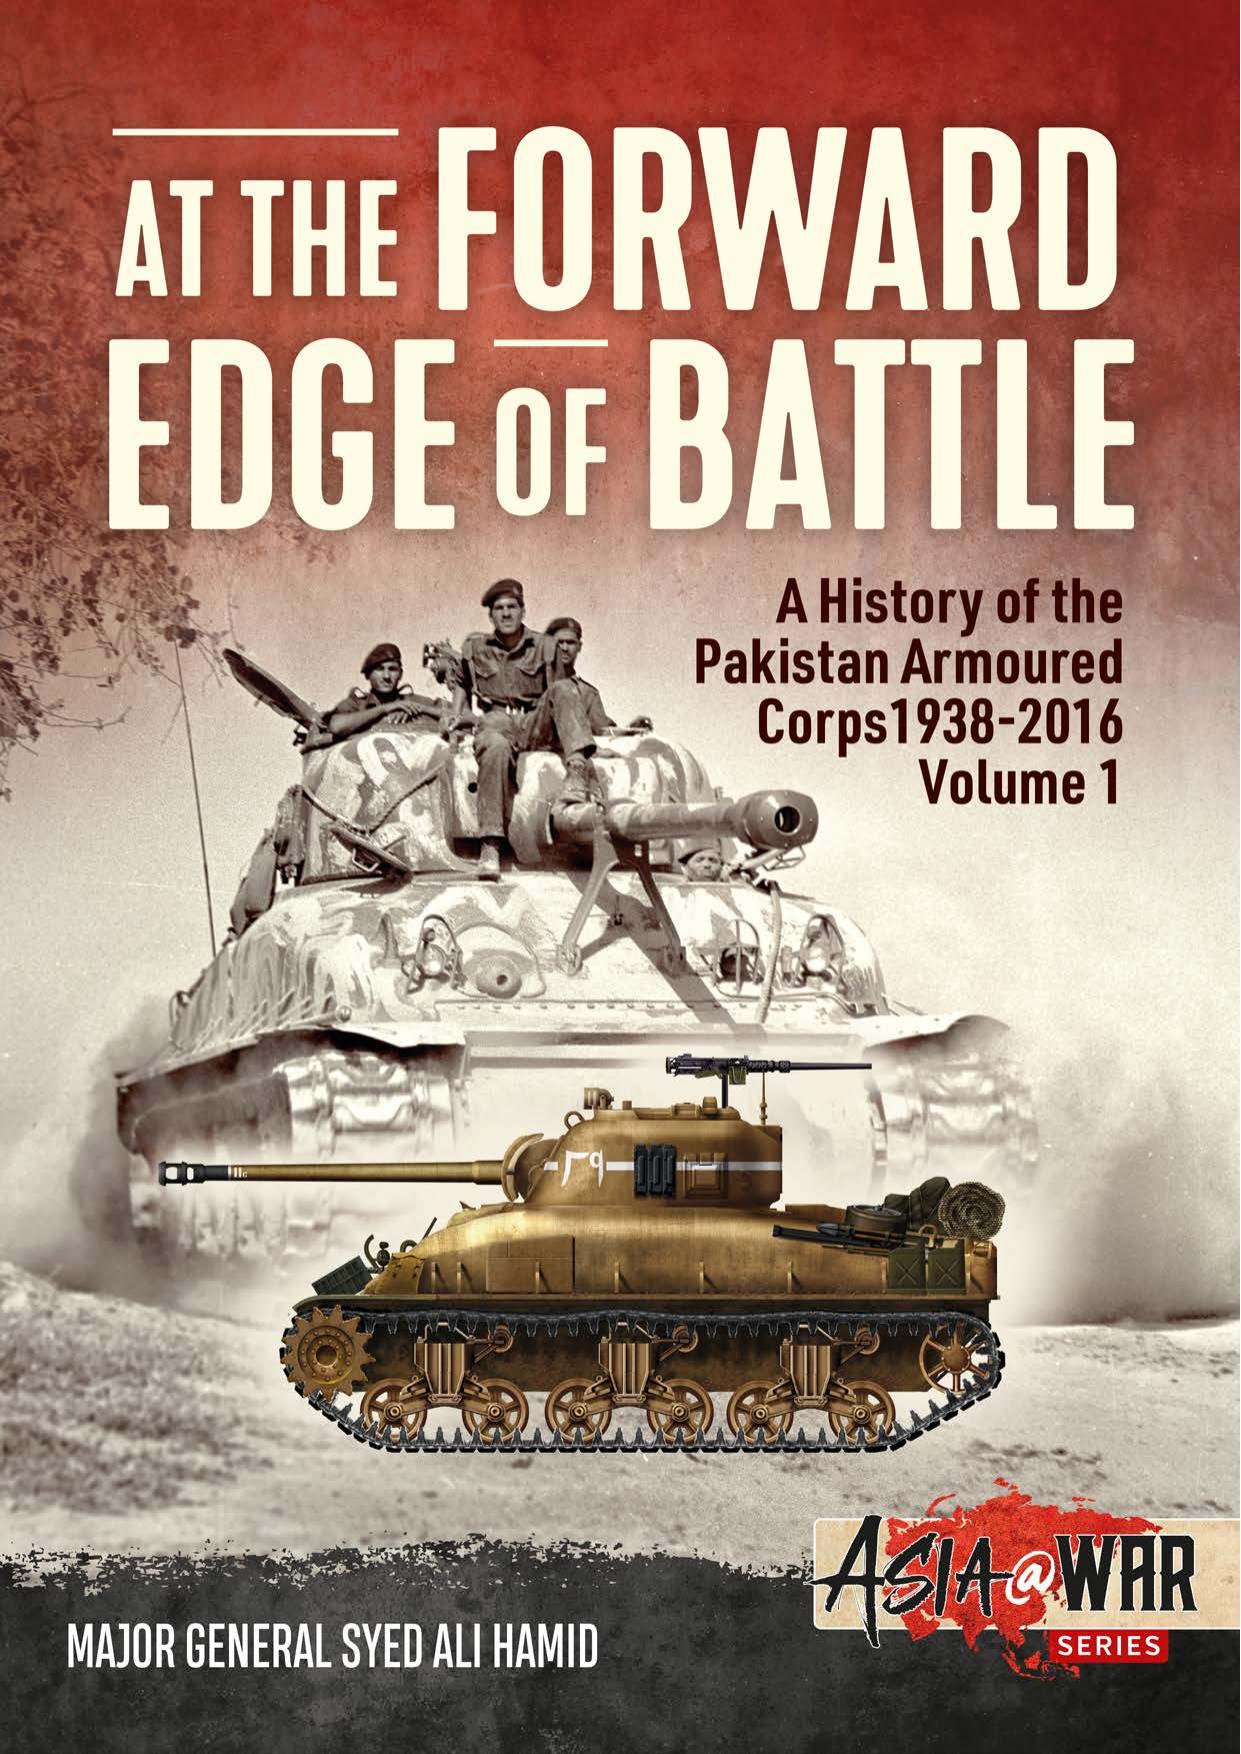 At the Forward Edge of Battle: A History of the Pakistan Armoured Corps 1938-2016 (1) by Syed Ali Hamid